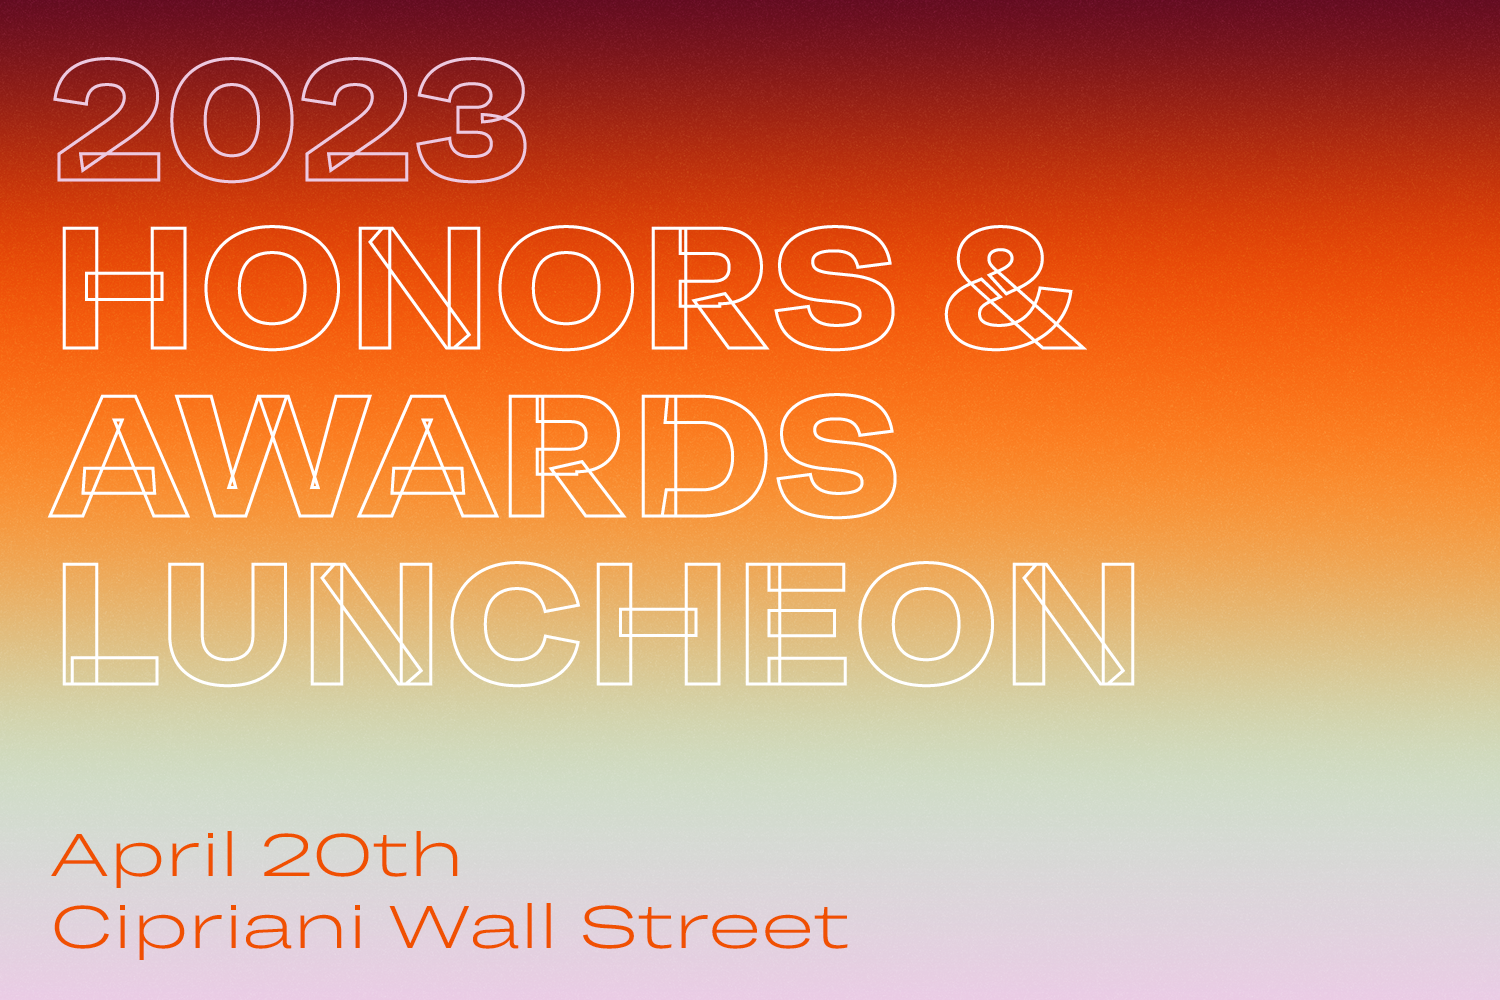 Promotional image for 2023 Honors and Awards Luncheon featuring orange to lavender gradient